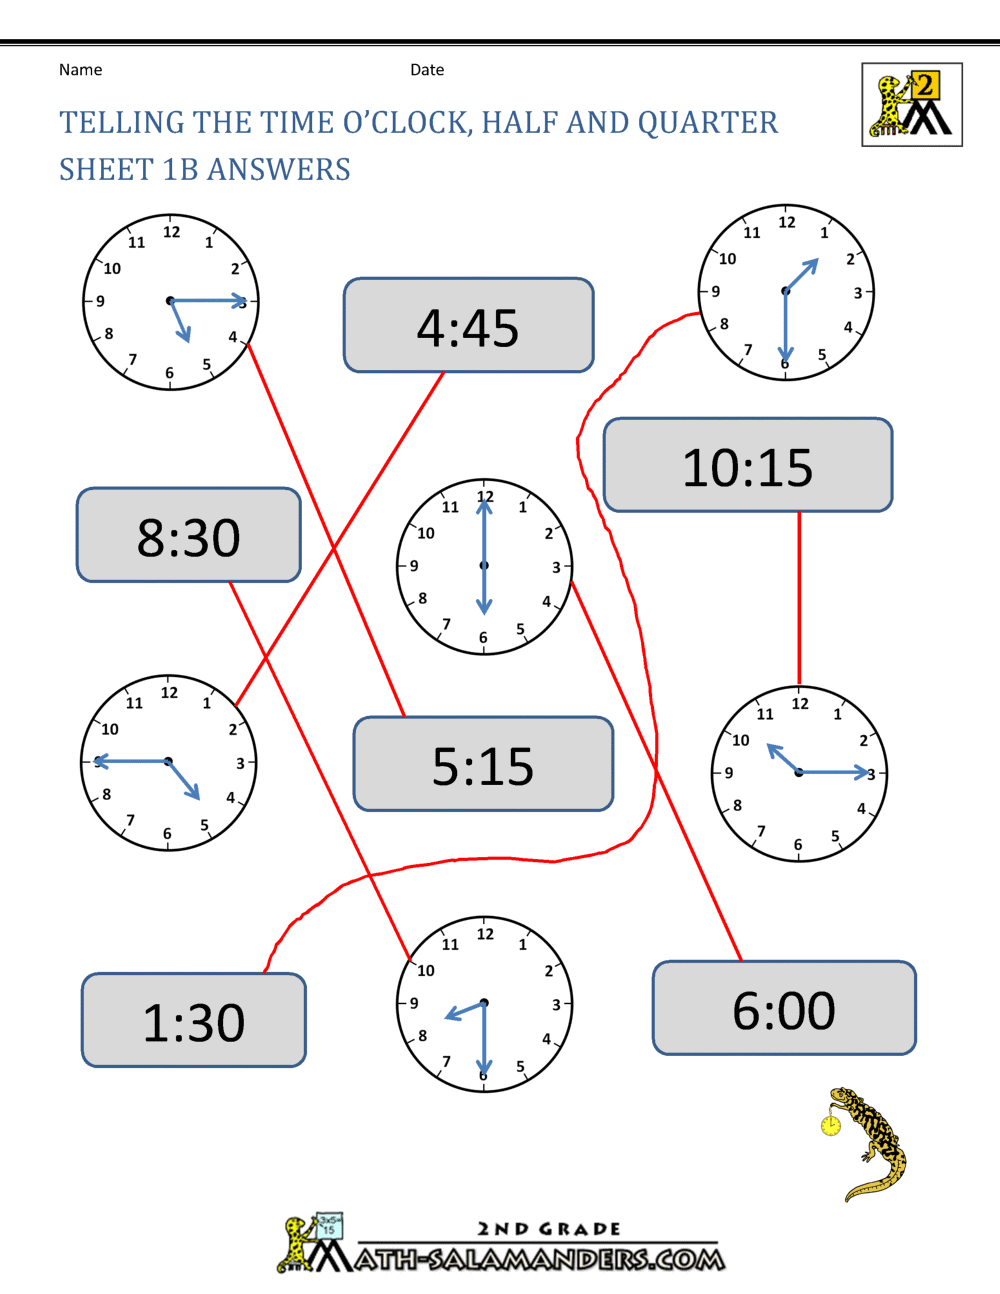 telling-time-worksheets-grade-4-to-the-nearest-minute-telling-time